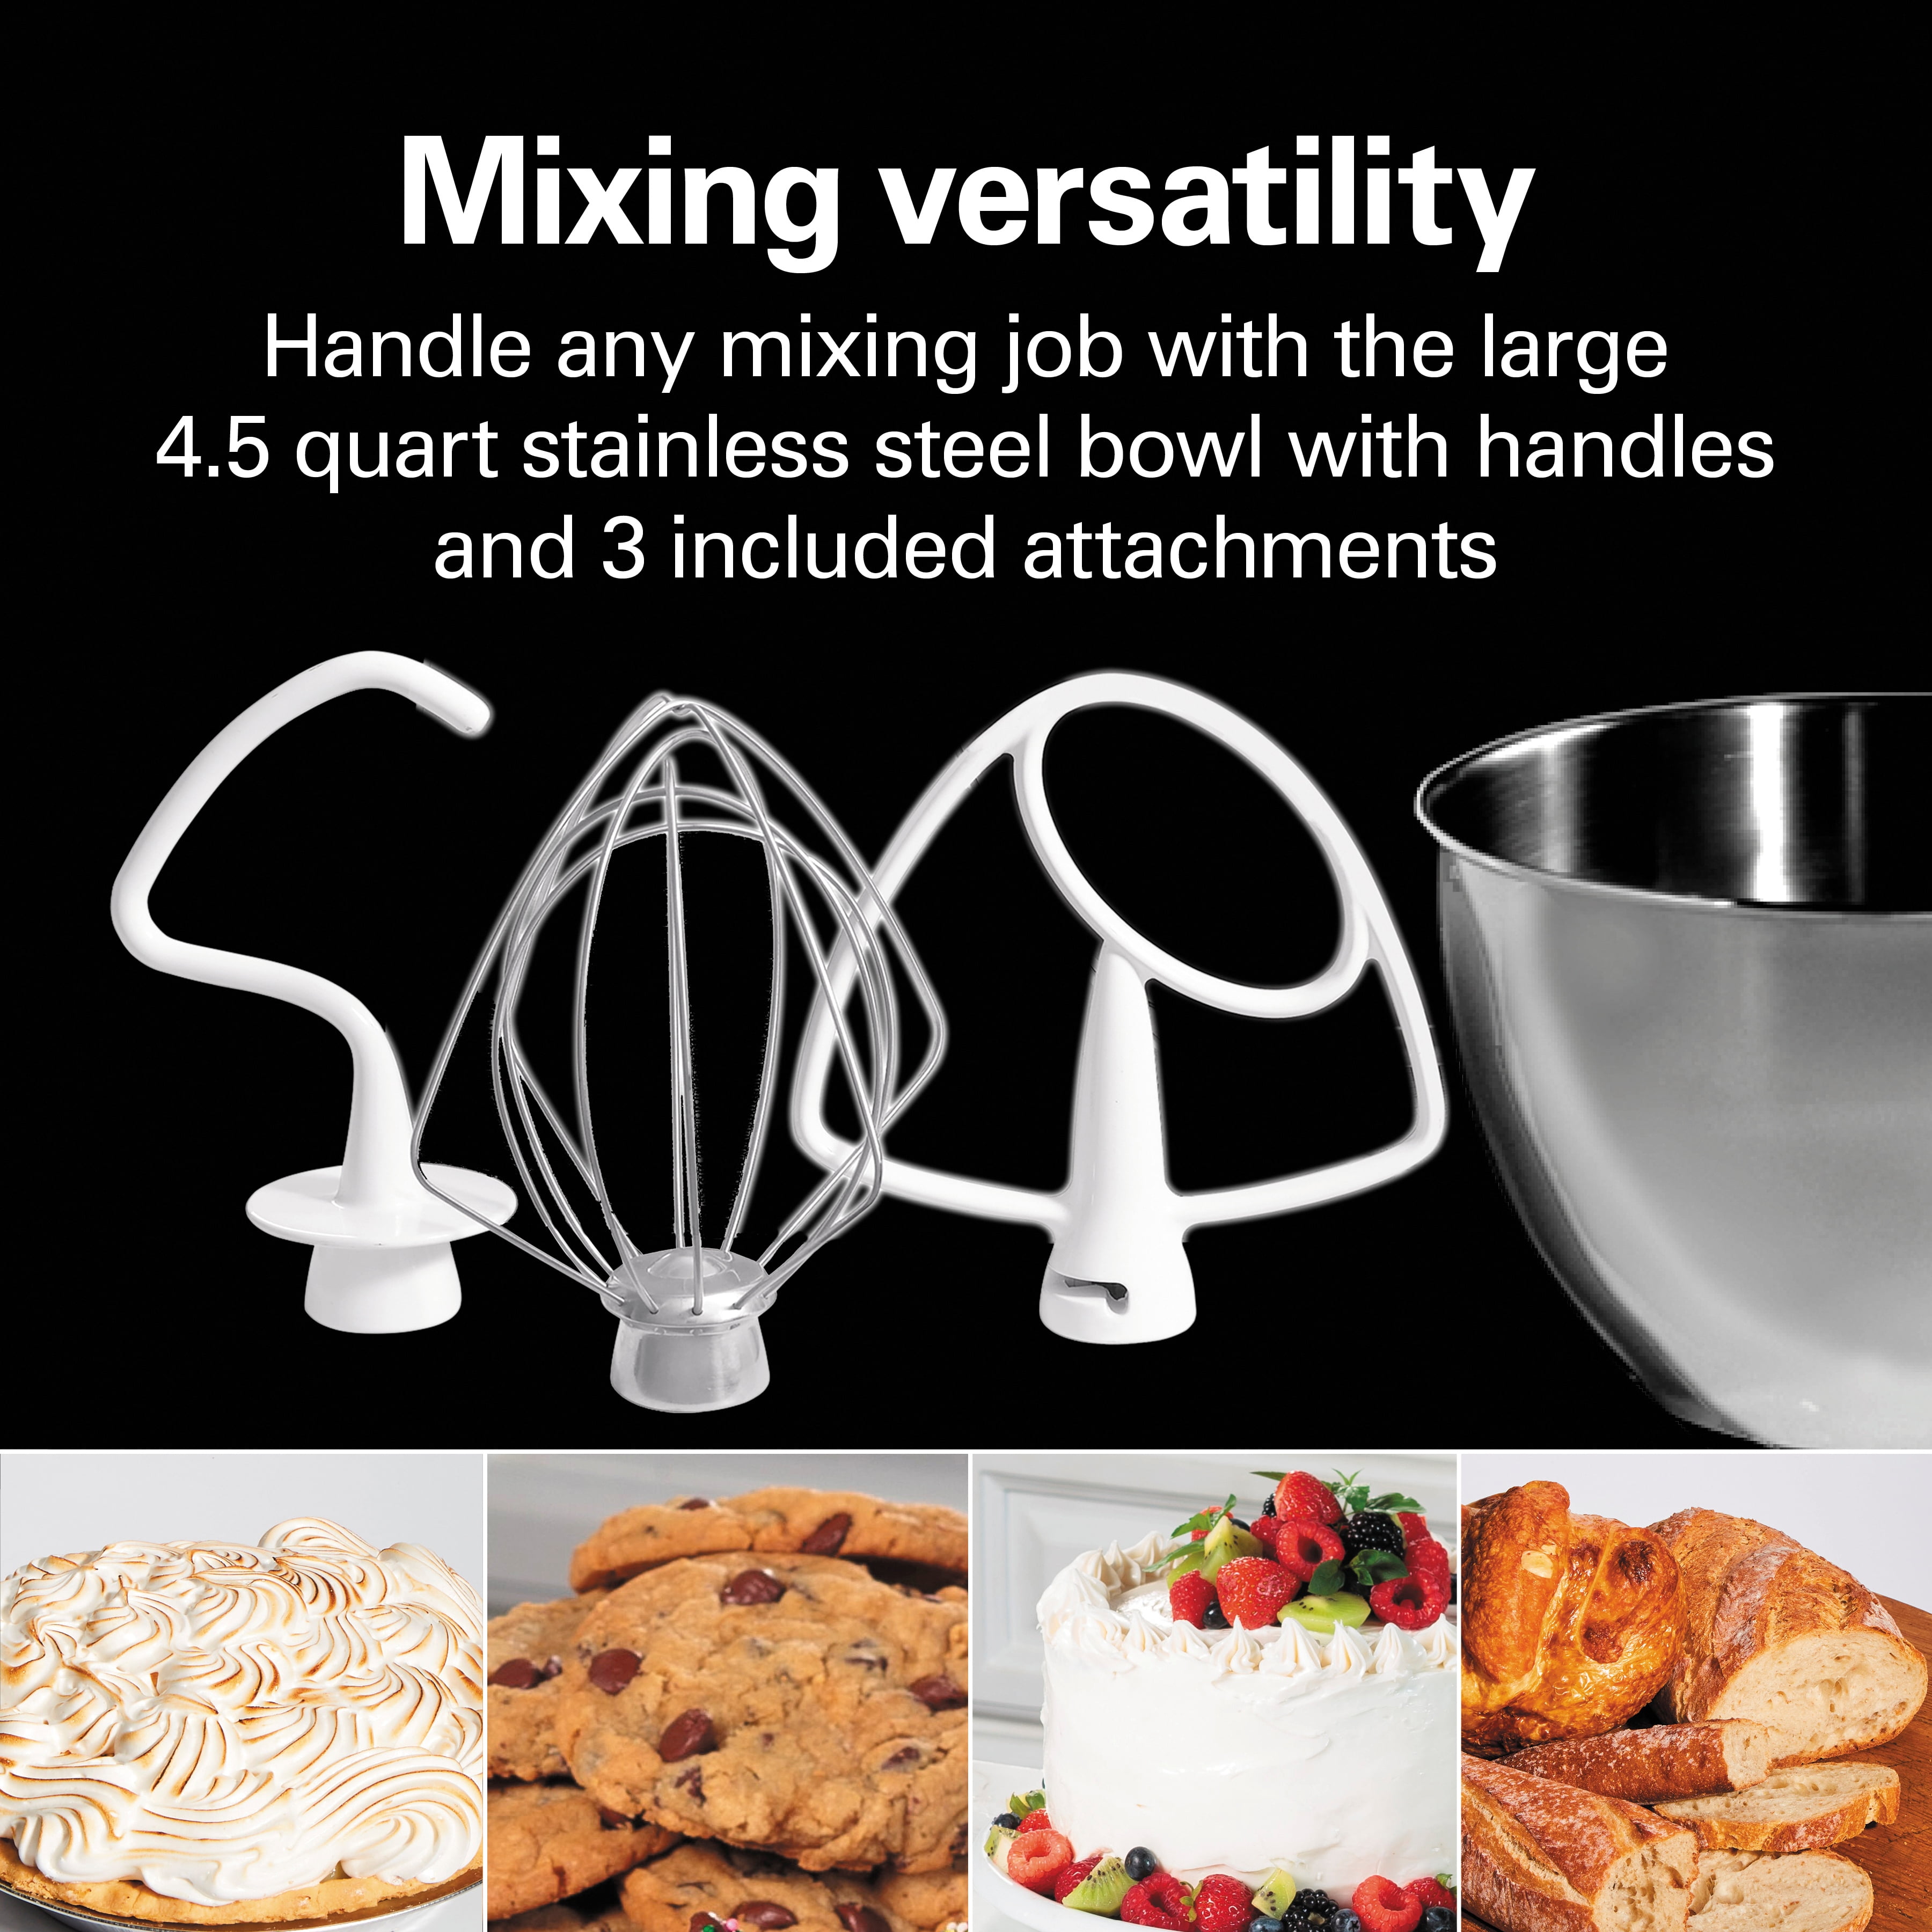 Eclectrics® All-Metal Stand Mixer - White - 63221